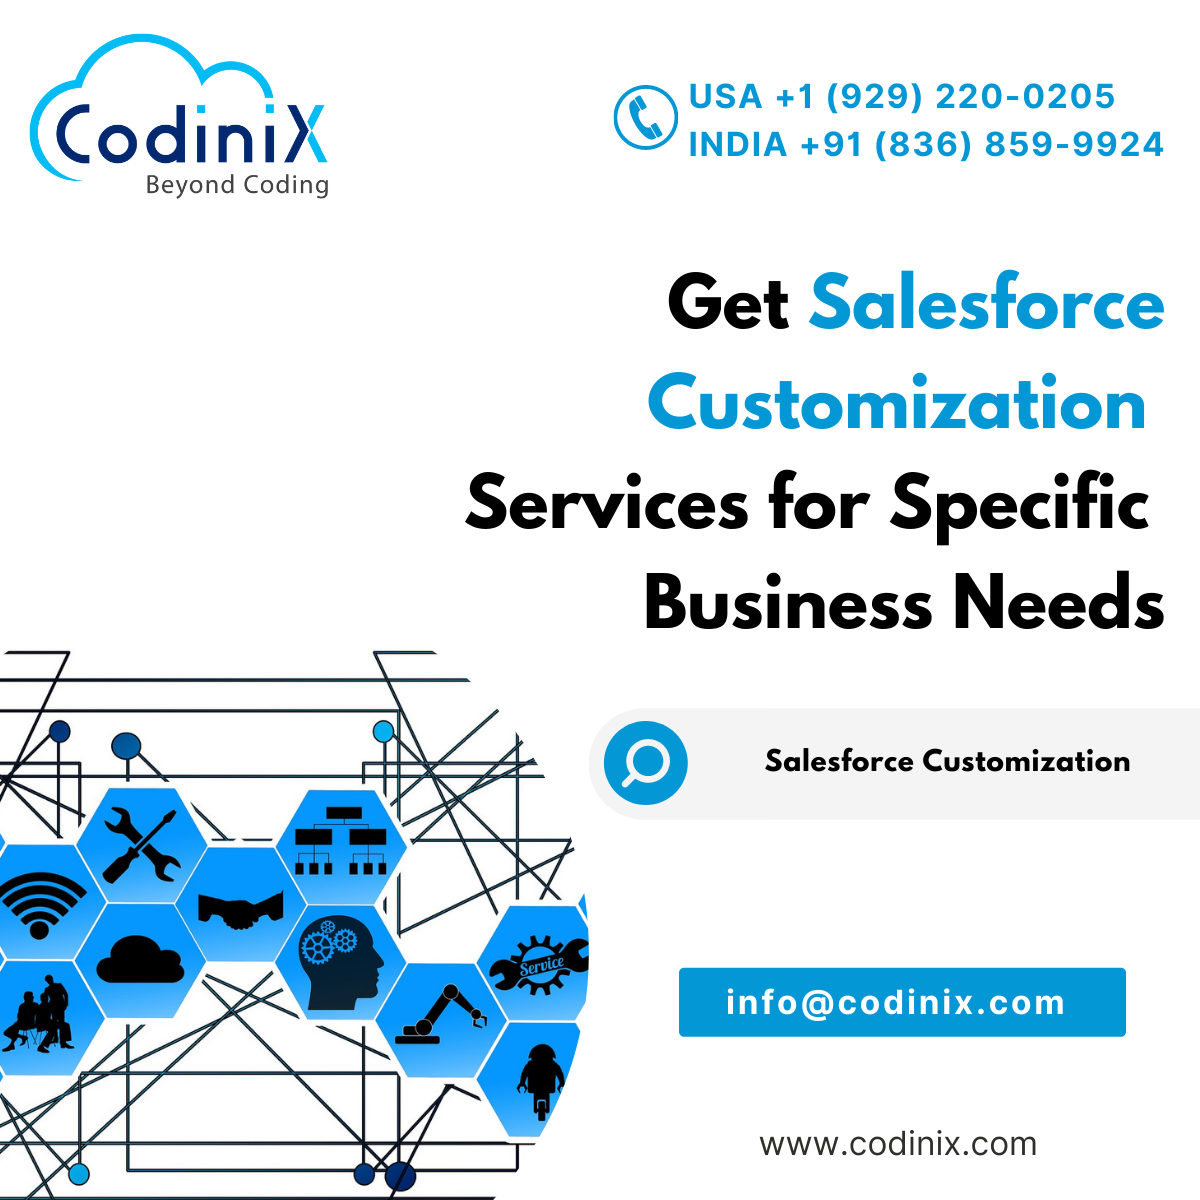 Know about Best Practices for Salesforce Customization